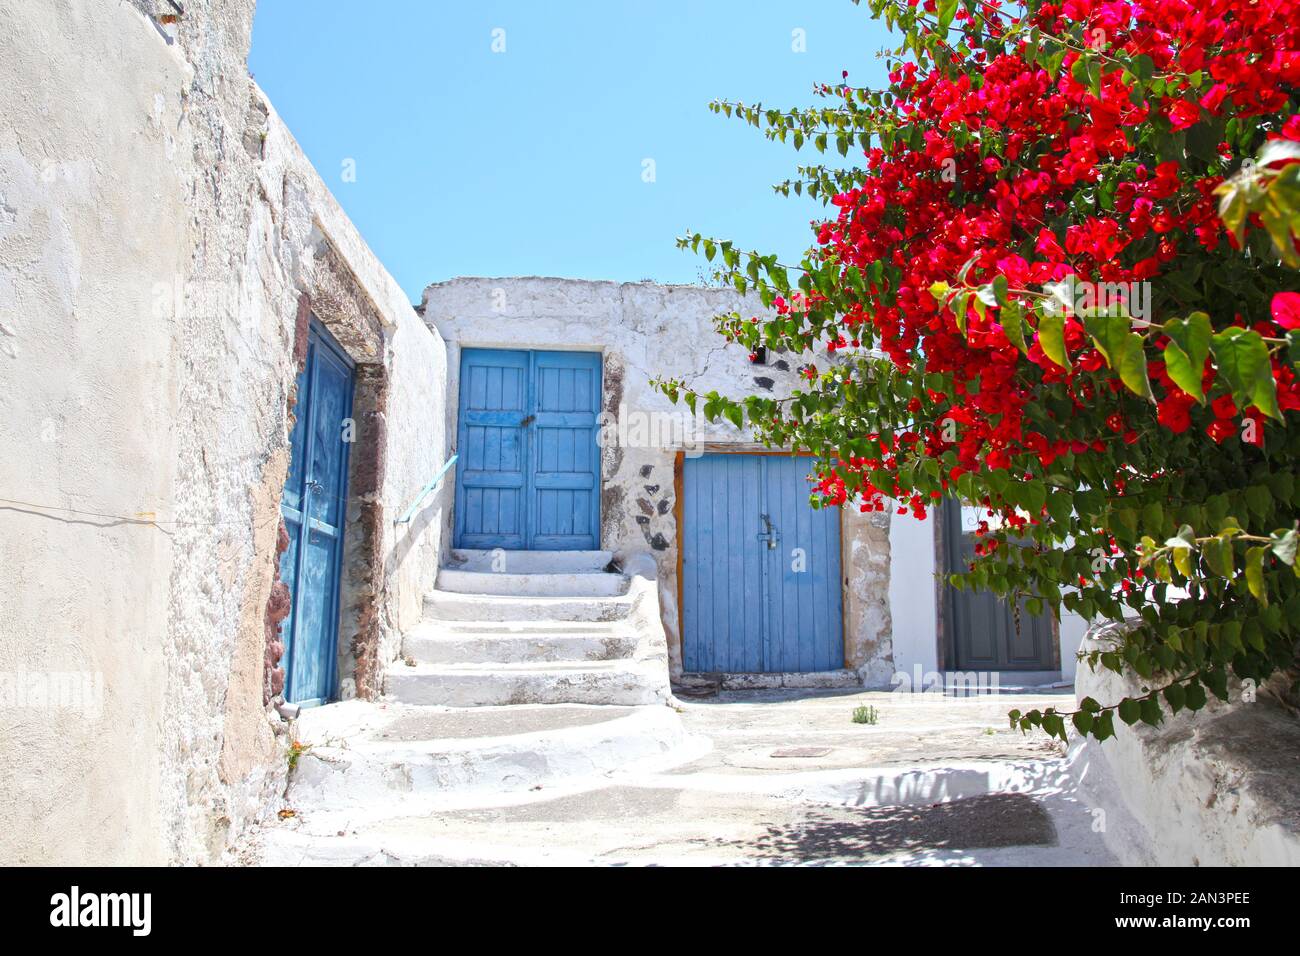 White painted walls with blue doors and red bougainvillea flowers in the foreground, in the traditional village of Megalochori, Santorini, Greece. Stock Photo